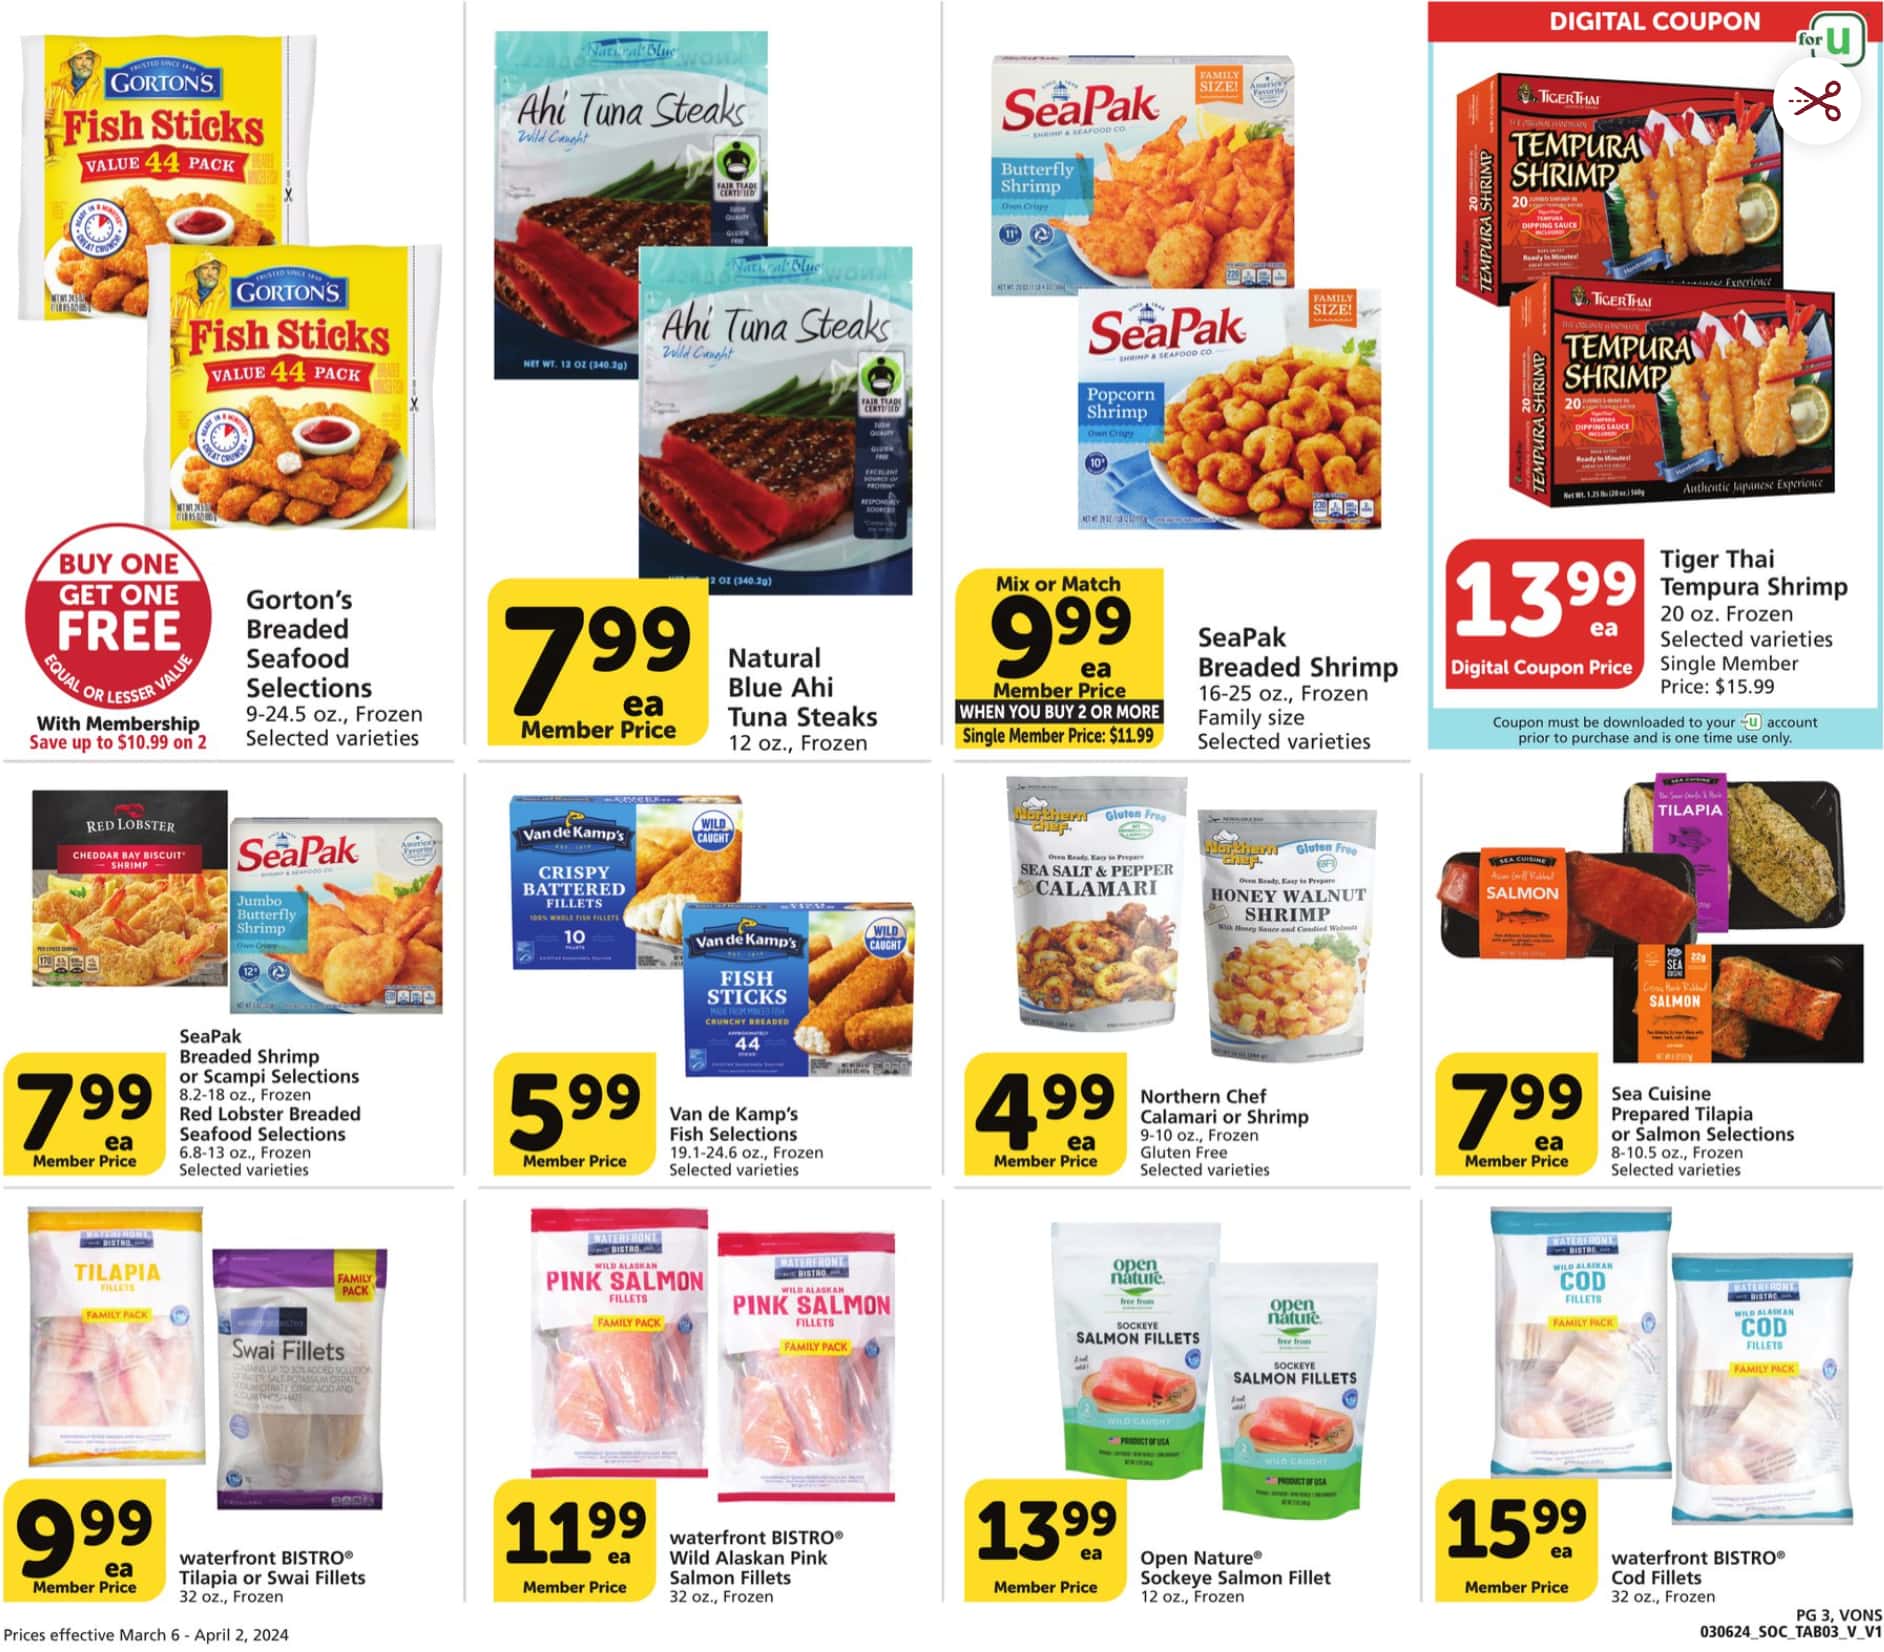 Vons_weekly_ad_030524_03